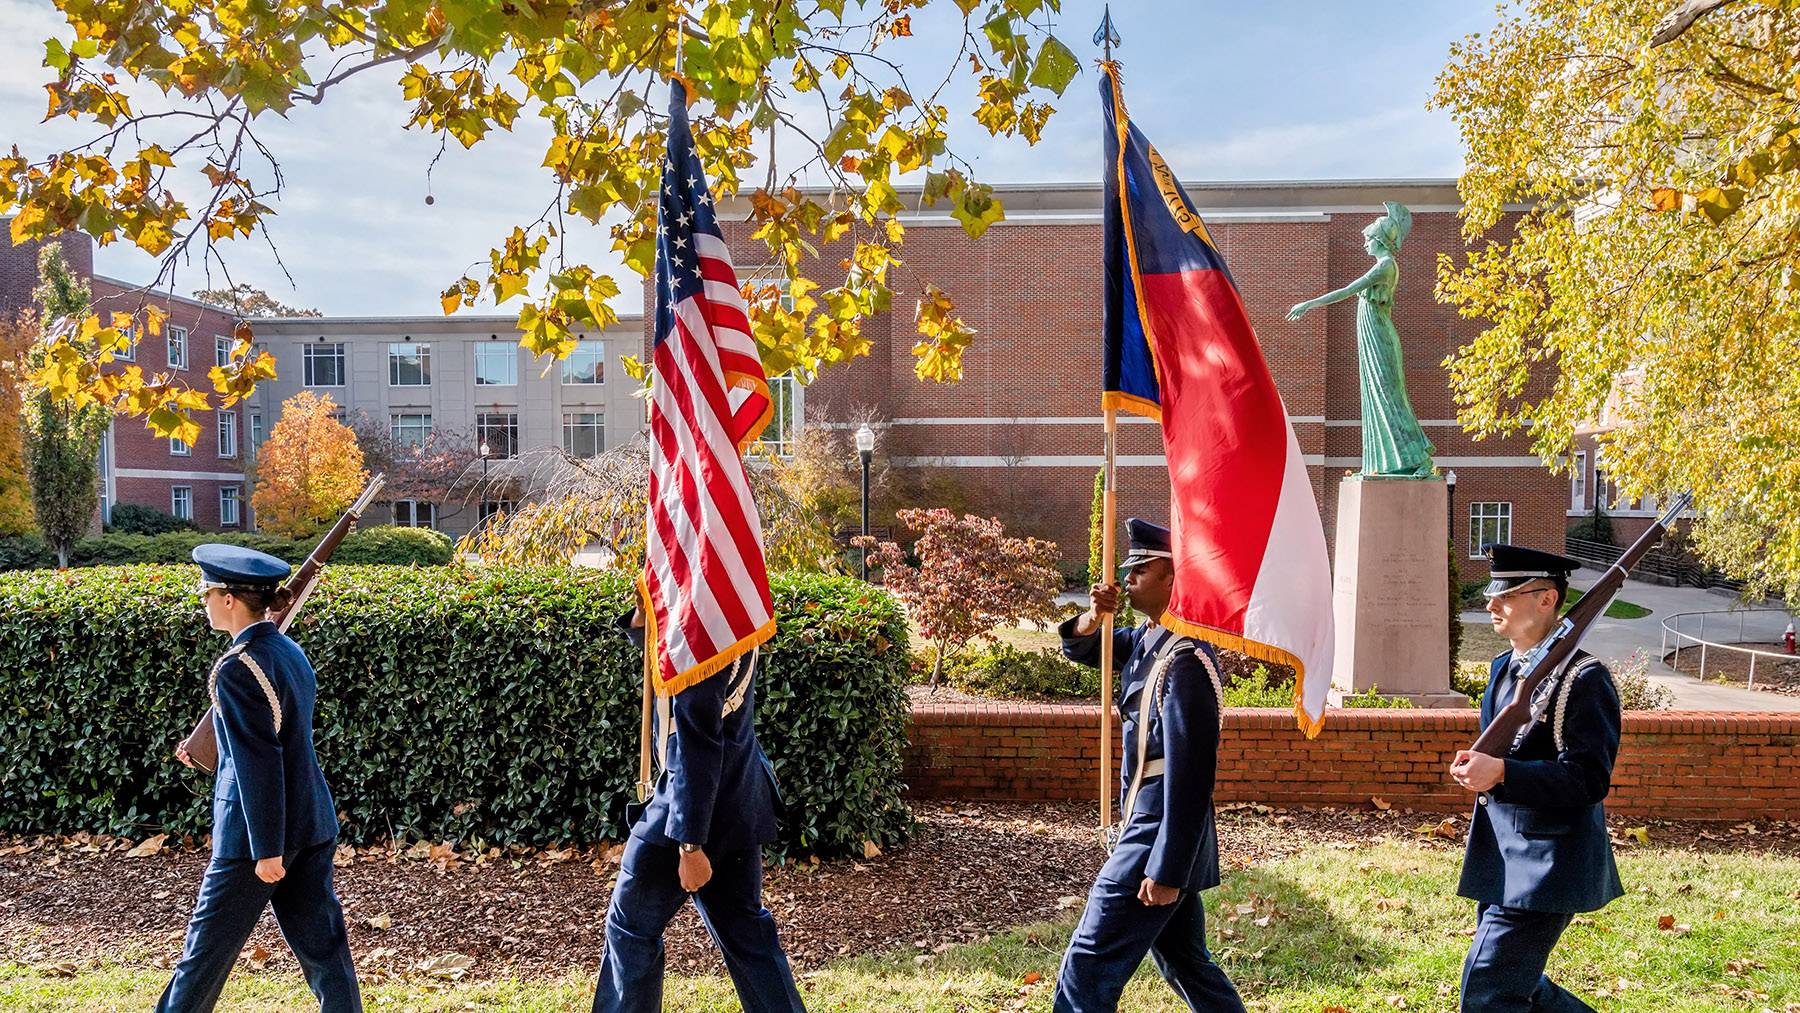 Air Force ROTC members march in formation with the US and North Carolina flags during a Veterans Day ceremony.